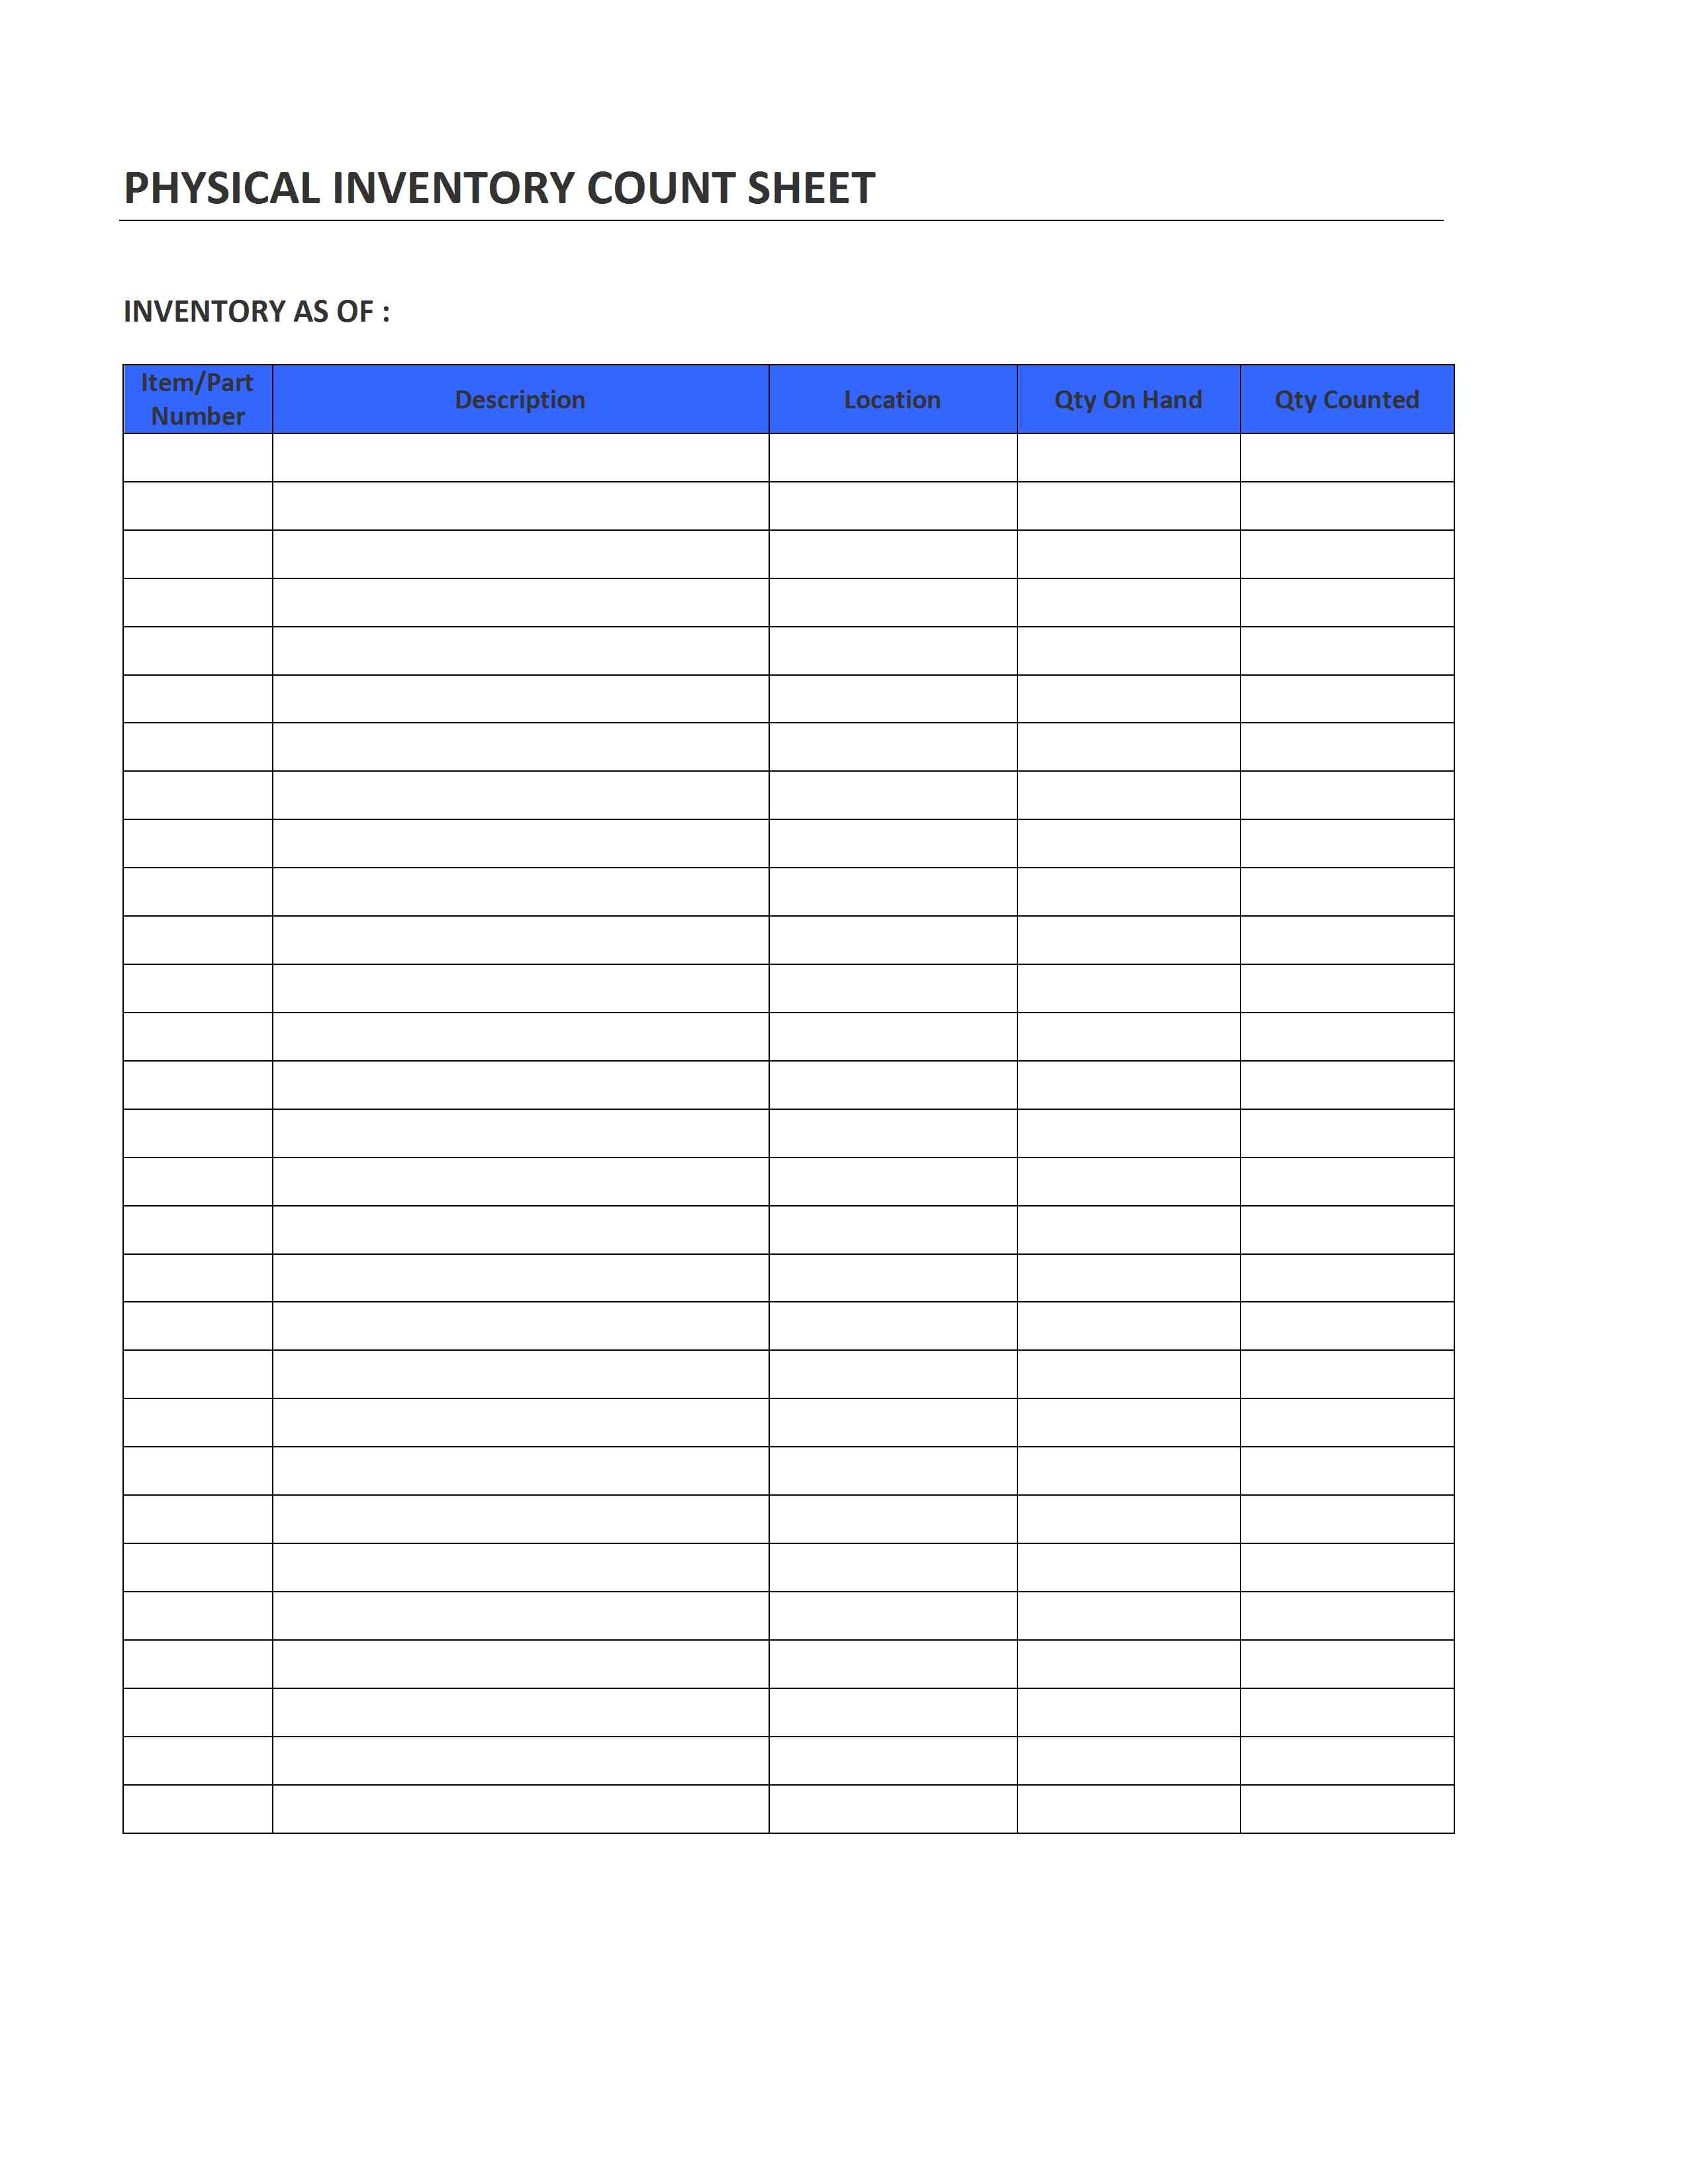 Physical Inventory Count Sheet Template